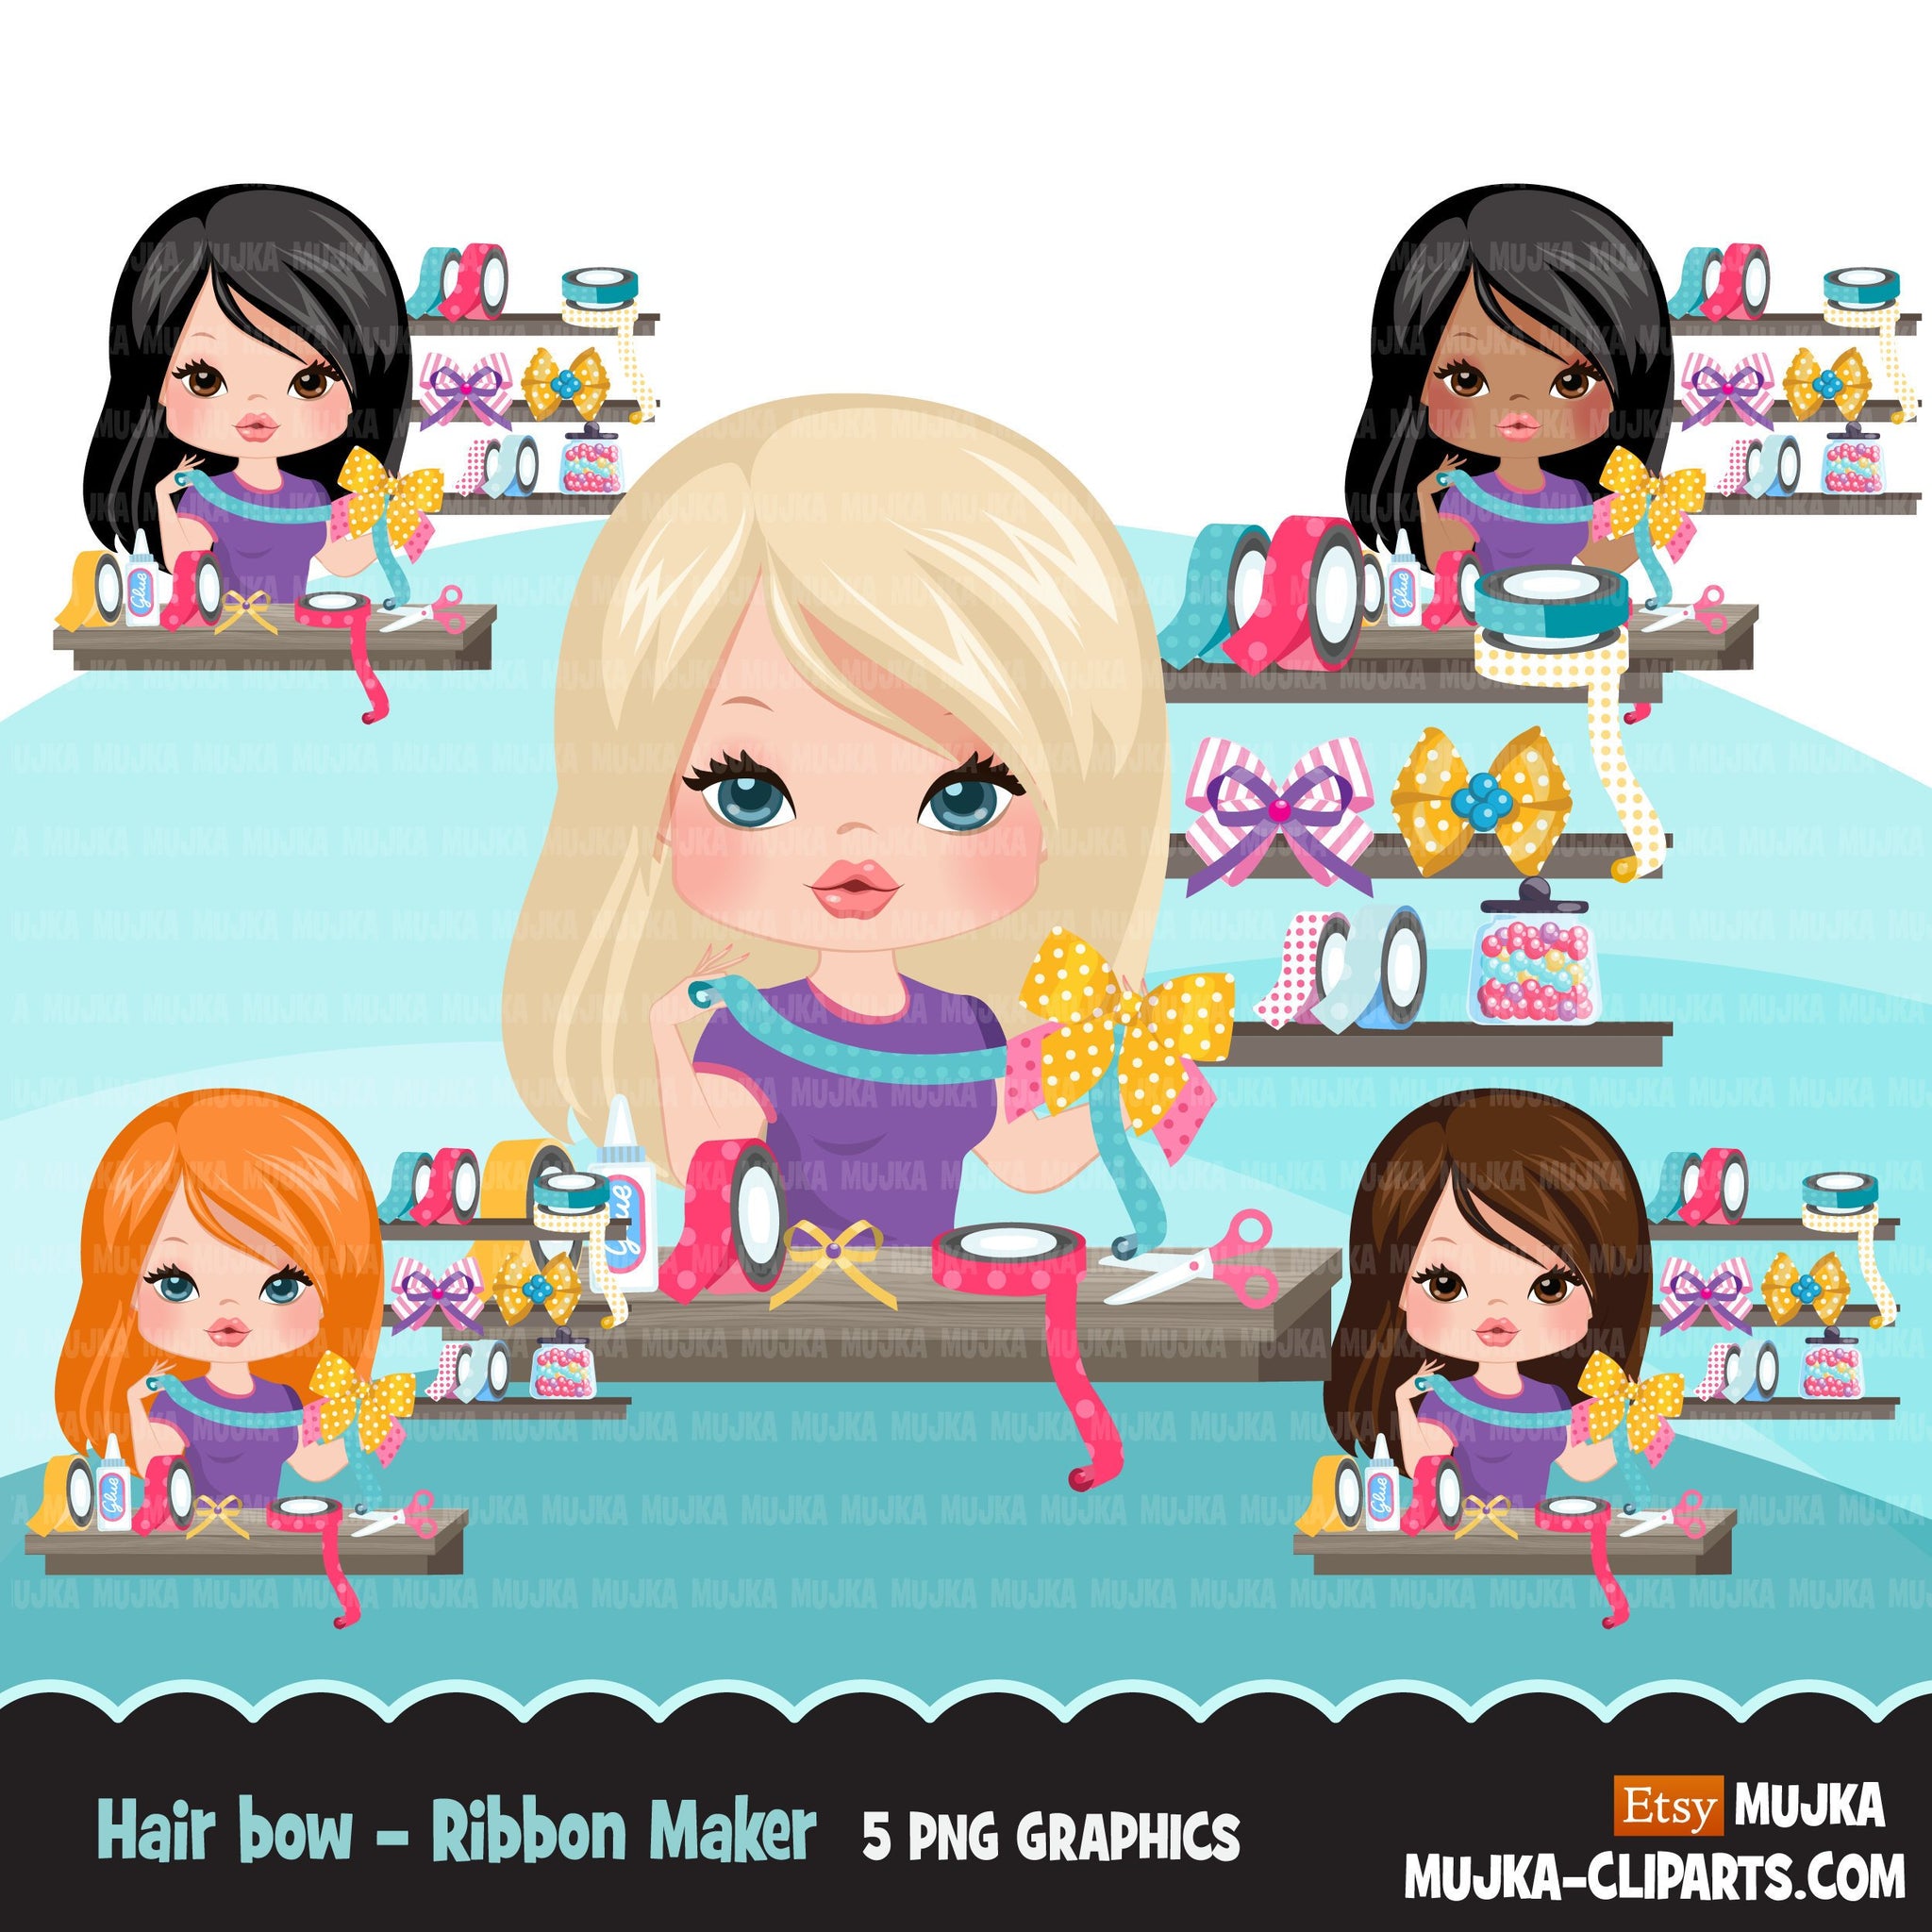 Woman hair bow maker avatar clipart with ribbons, print and cut, bow maker boss girl clip art